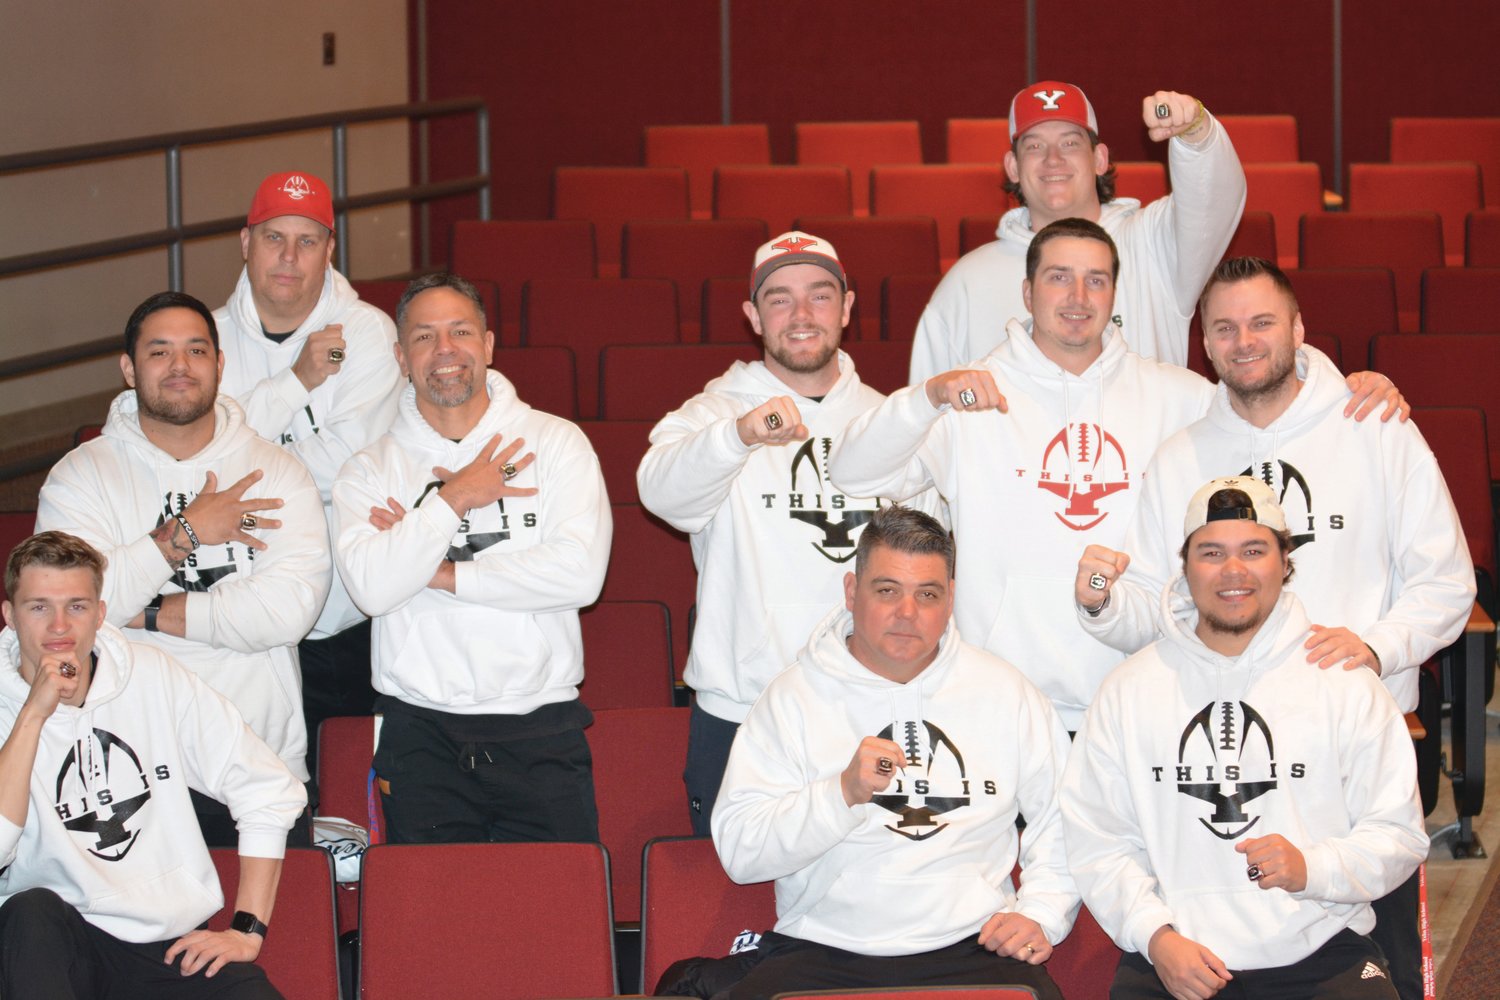 Coaches of the Yelm football program pose with their championship rings on Monday, March 27 at Yelm High School.